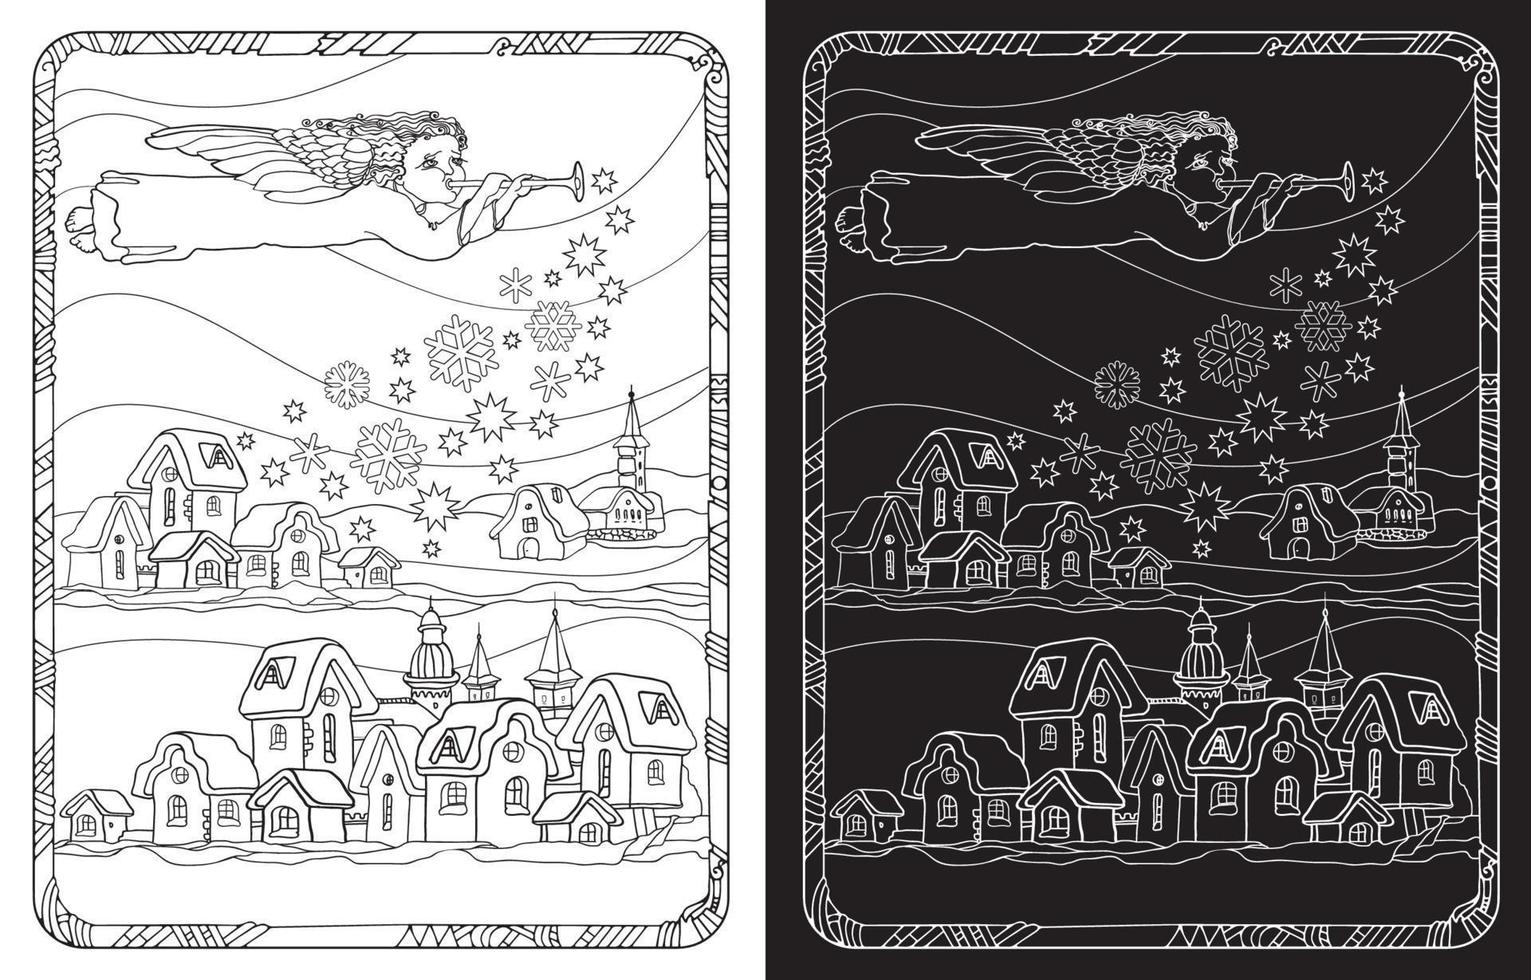 PrintColoring Page with Christmas town and magic angel. Vector illustration.